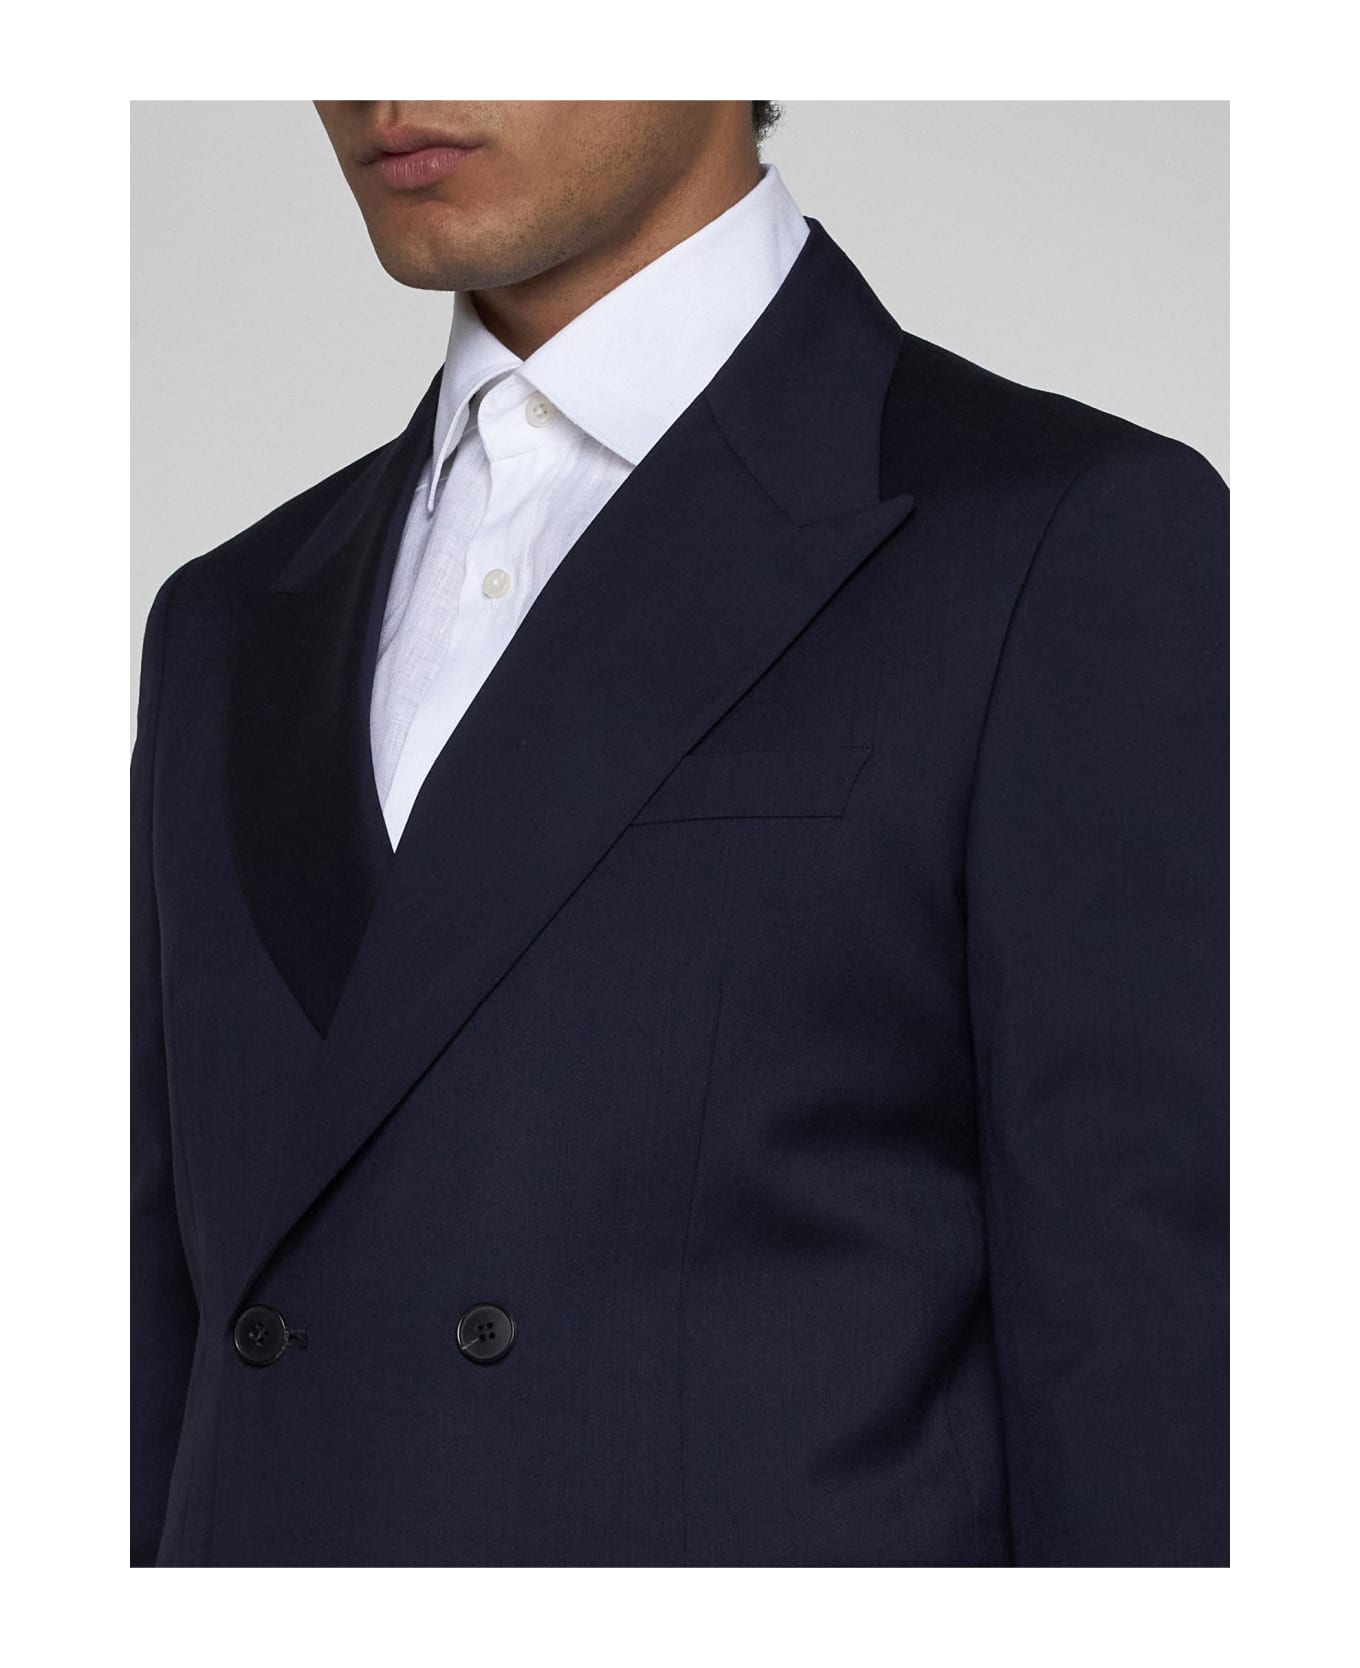 Low Brand Wool Double-breasted Suit